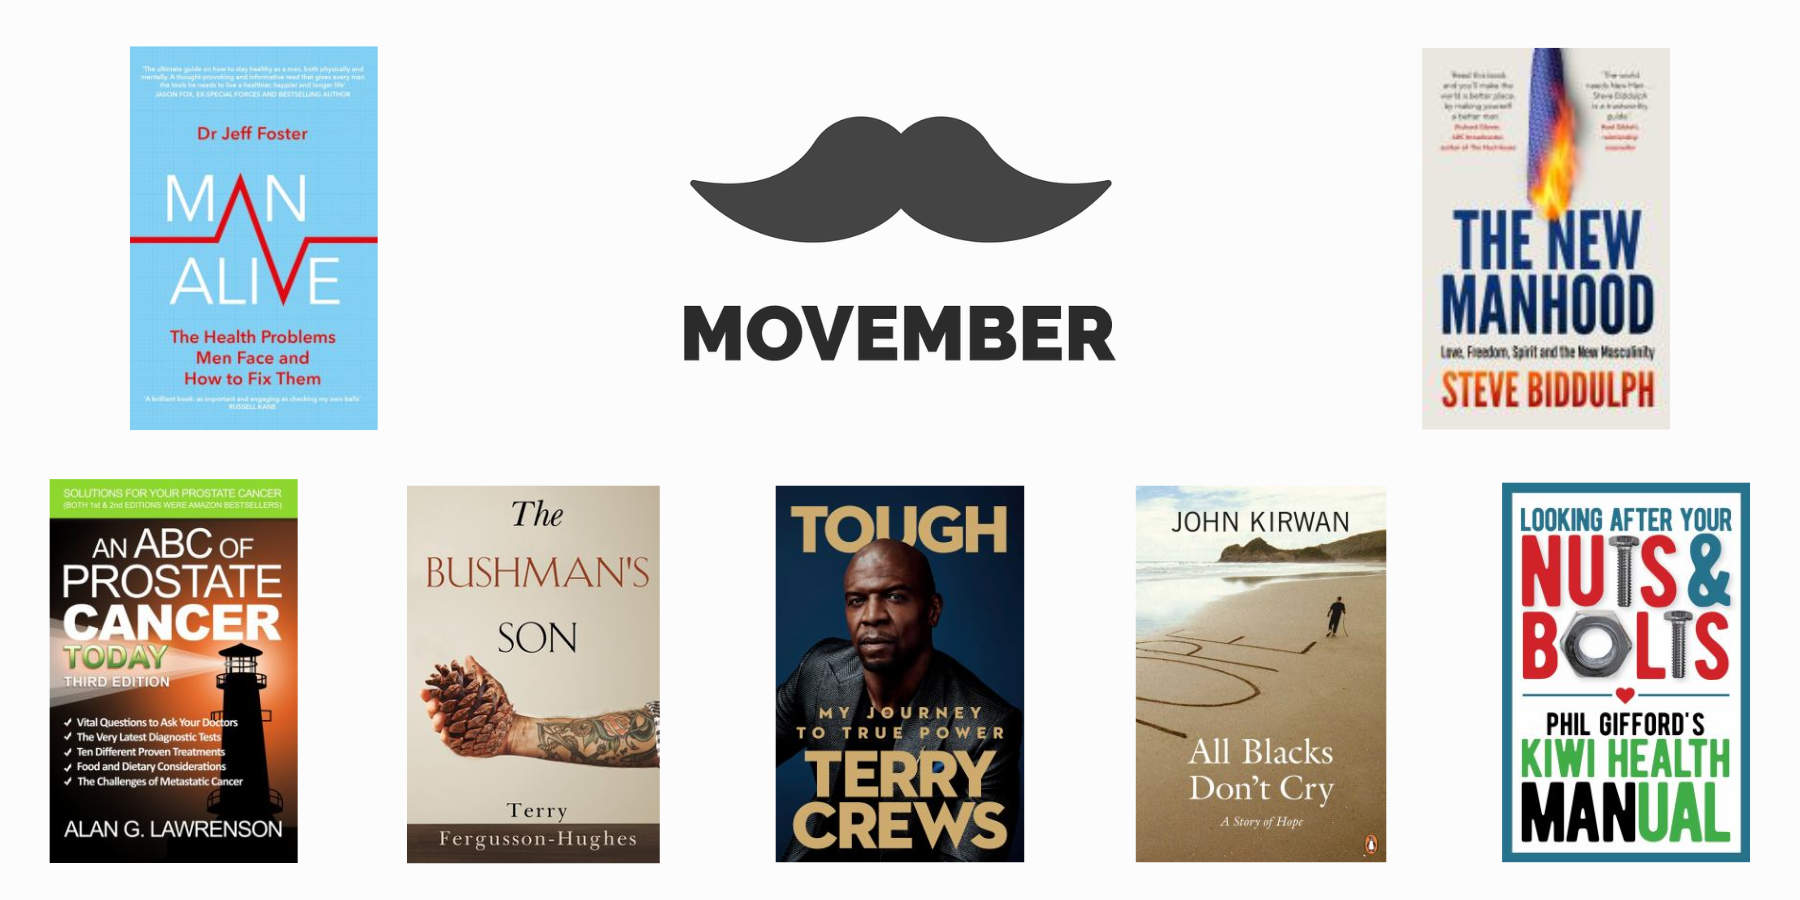 Movember moutache and covers of books mentioned